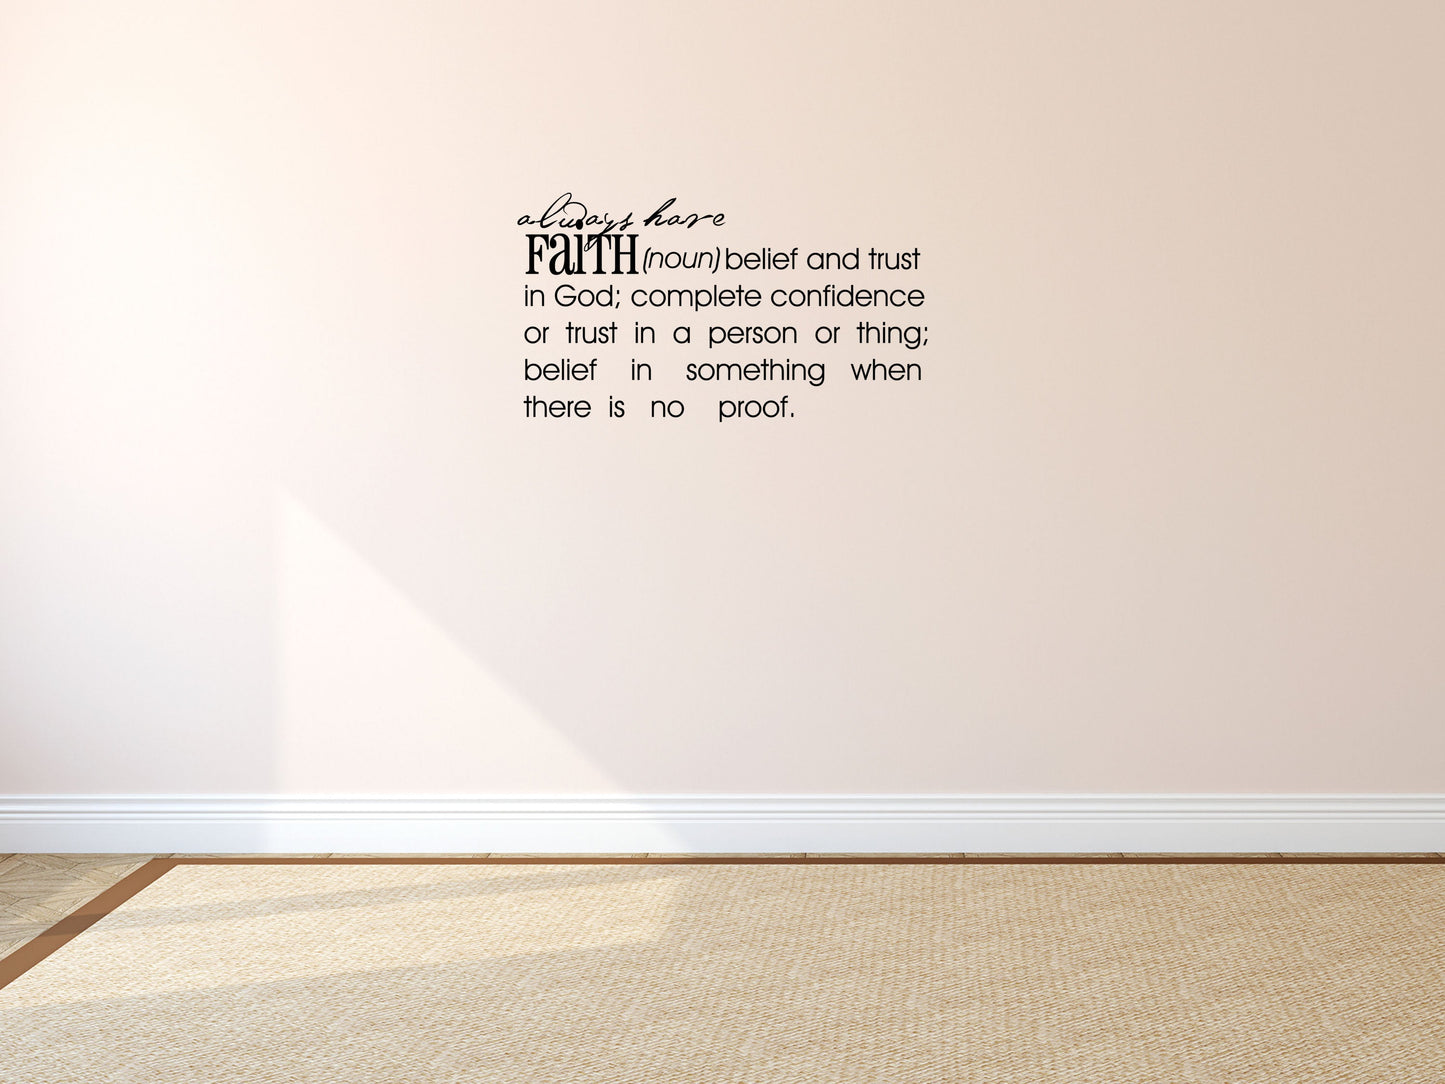 Faith Decal Quote - Inspirational Wall Decals Vinyl Wall Decal Inspirational Wall Signs 